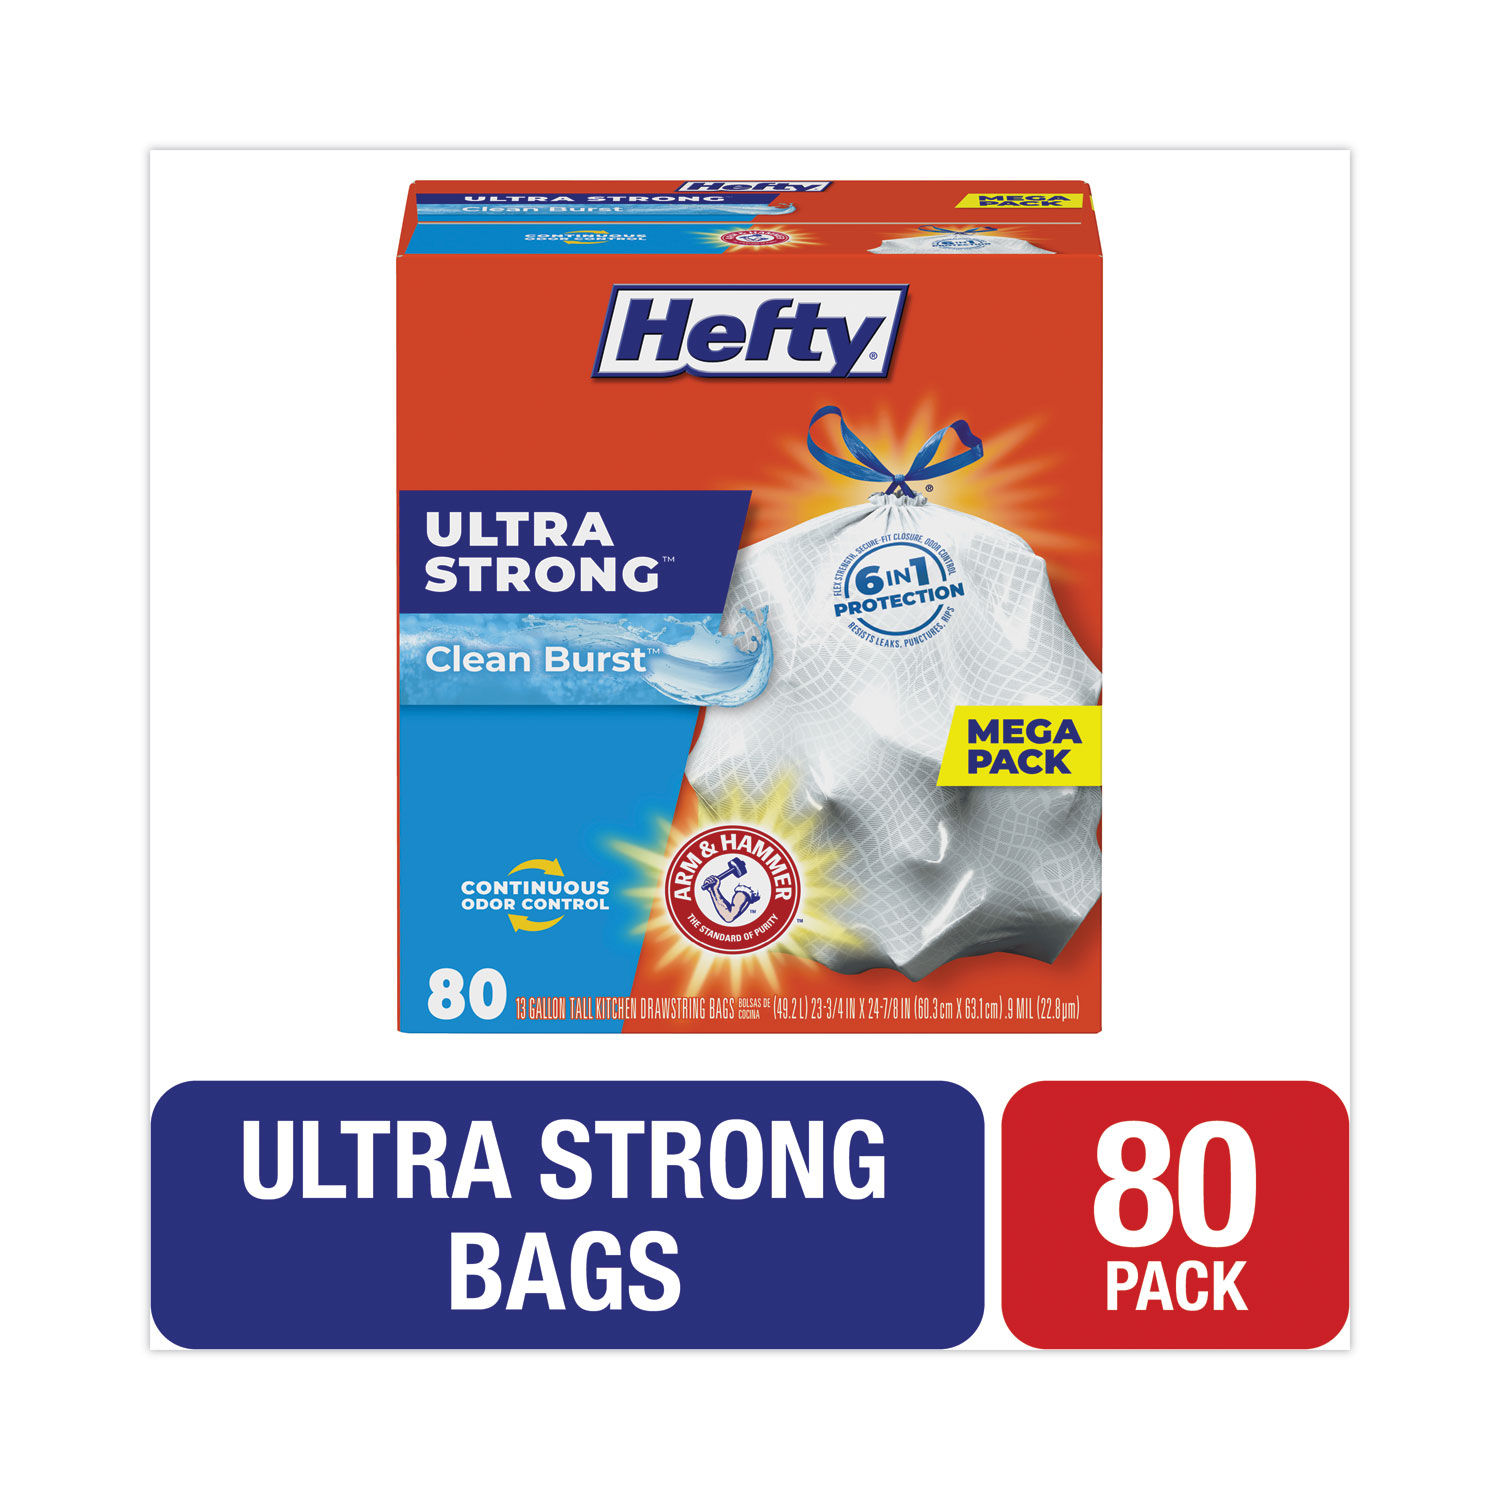 Hefty Ultra Strong Tall Kitchen Bags, Drawstring, Scent Free, 13 Gallon, Mega Pack - 80 bags